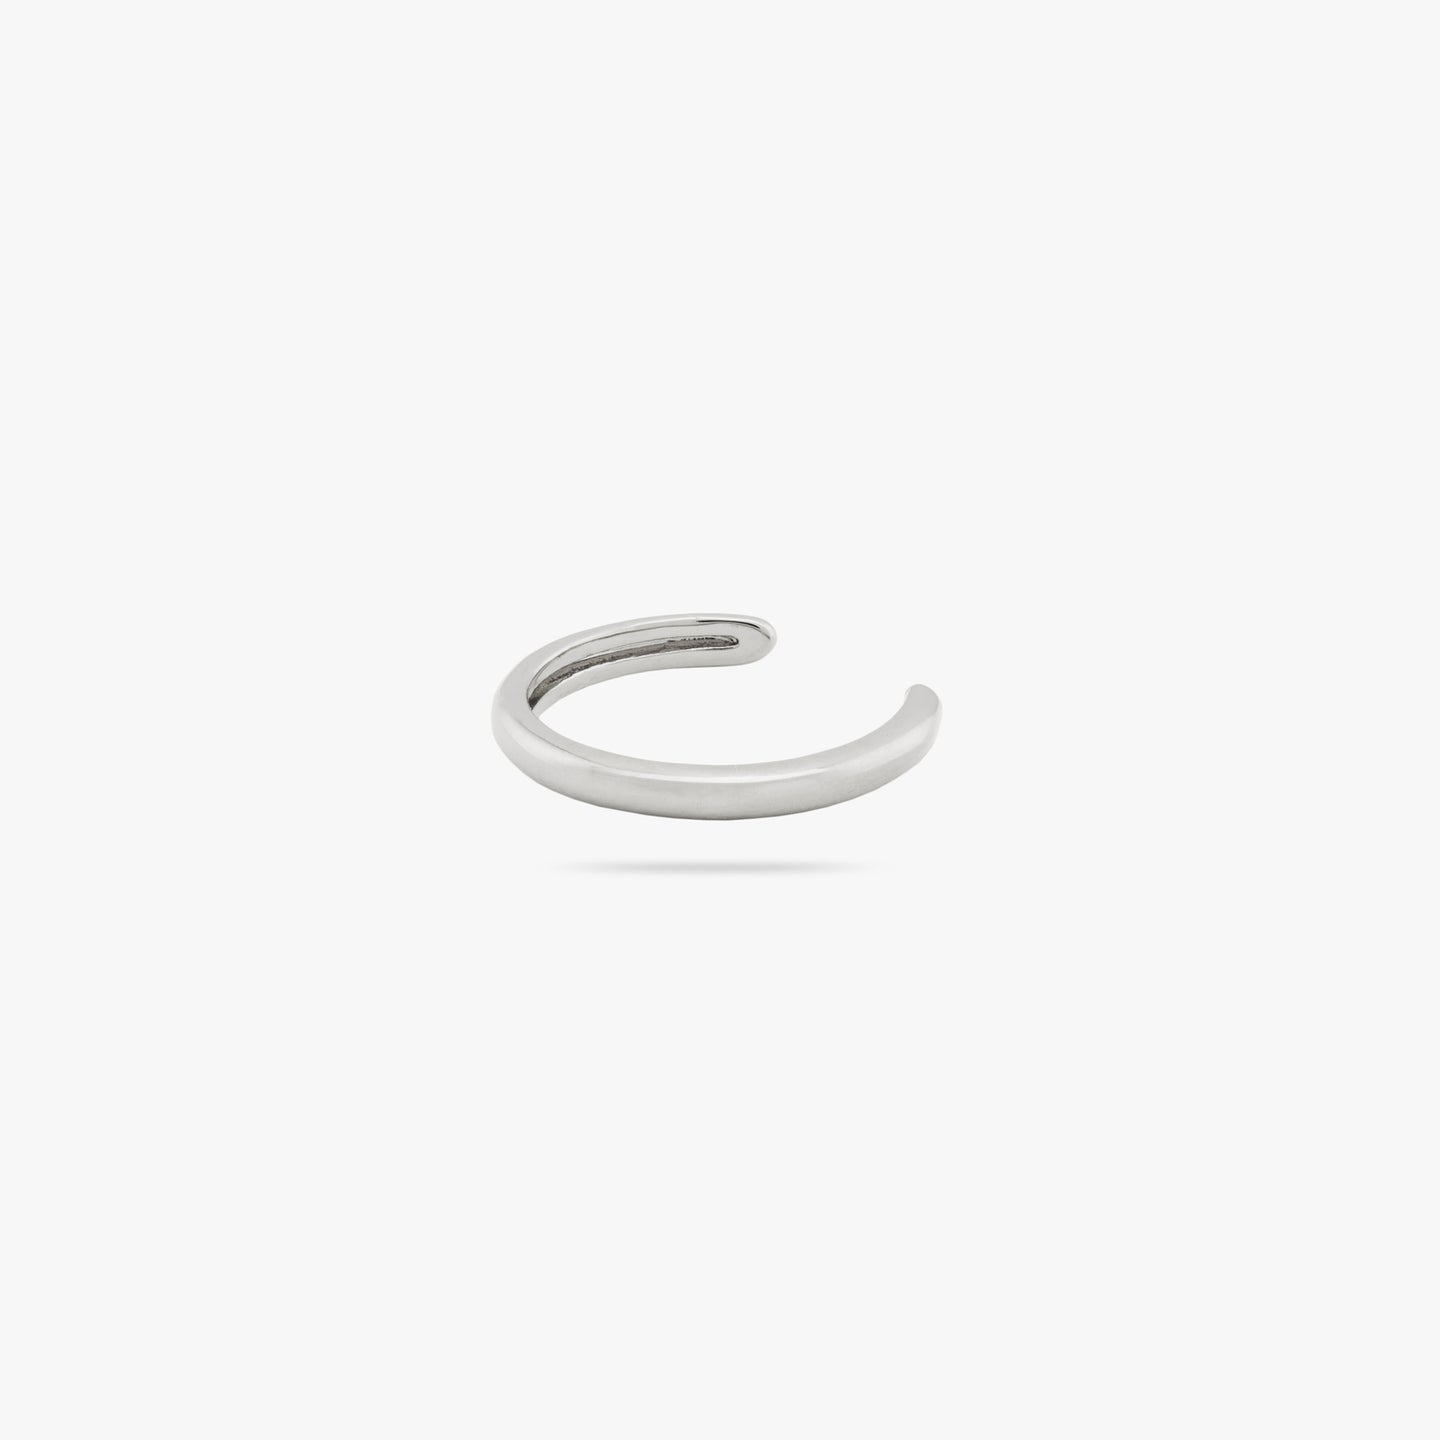 Slim silver ear cuff that requires no piercing. color:null|silver